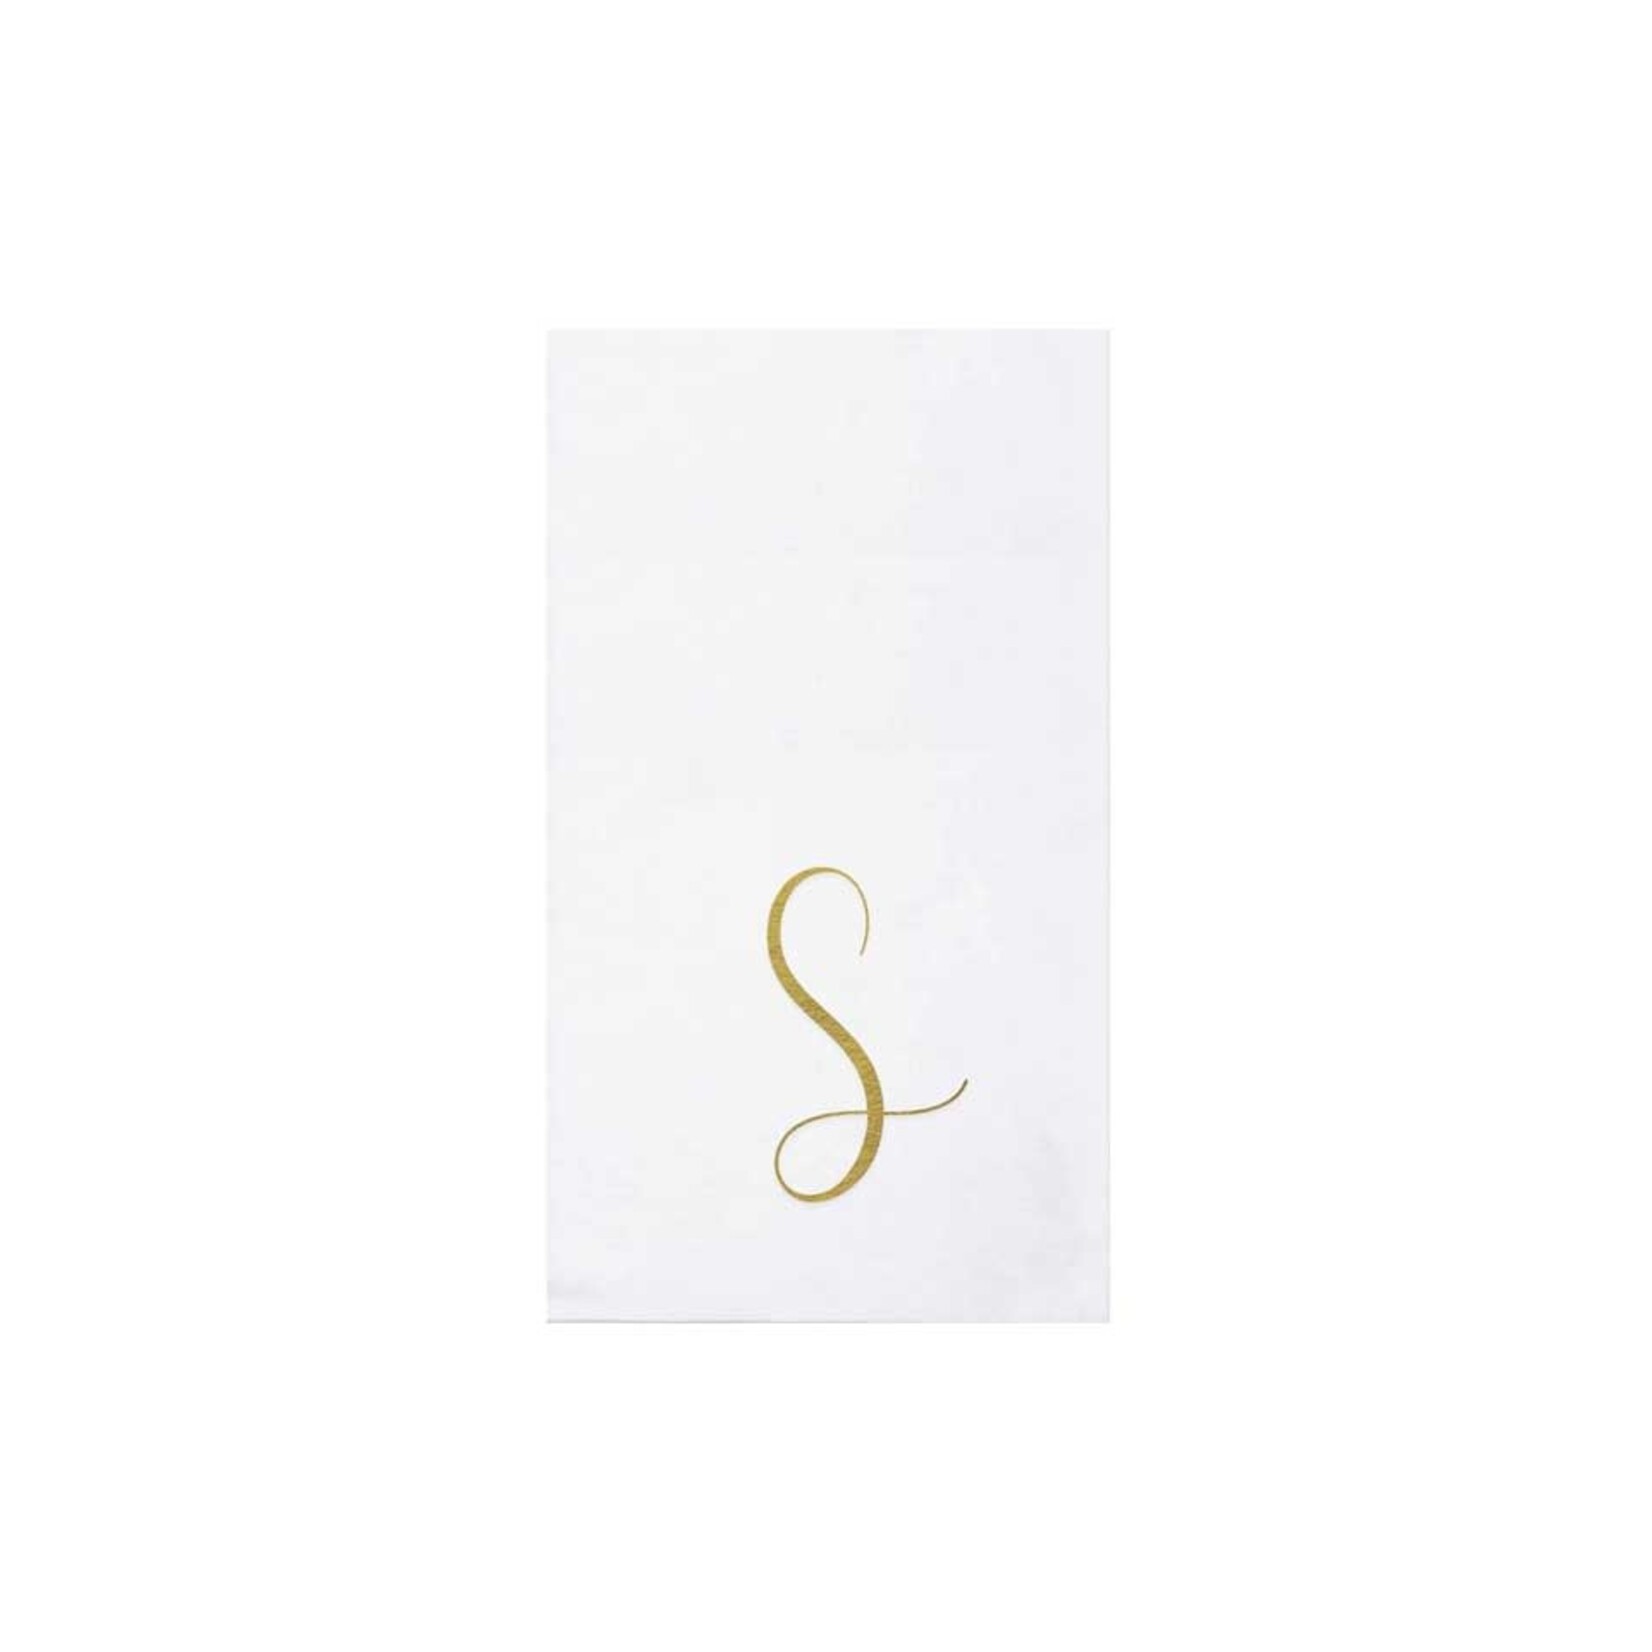 VIETRI Papersoft Napkins Gold Monogram Guest Towels - S (Pack of 20)